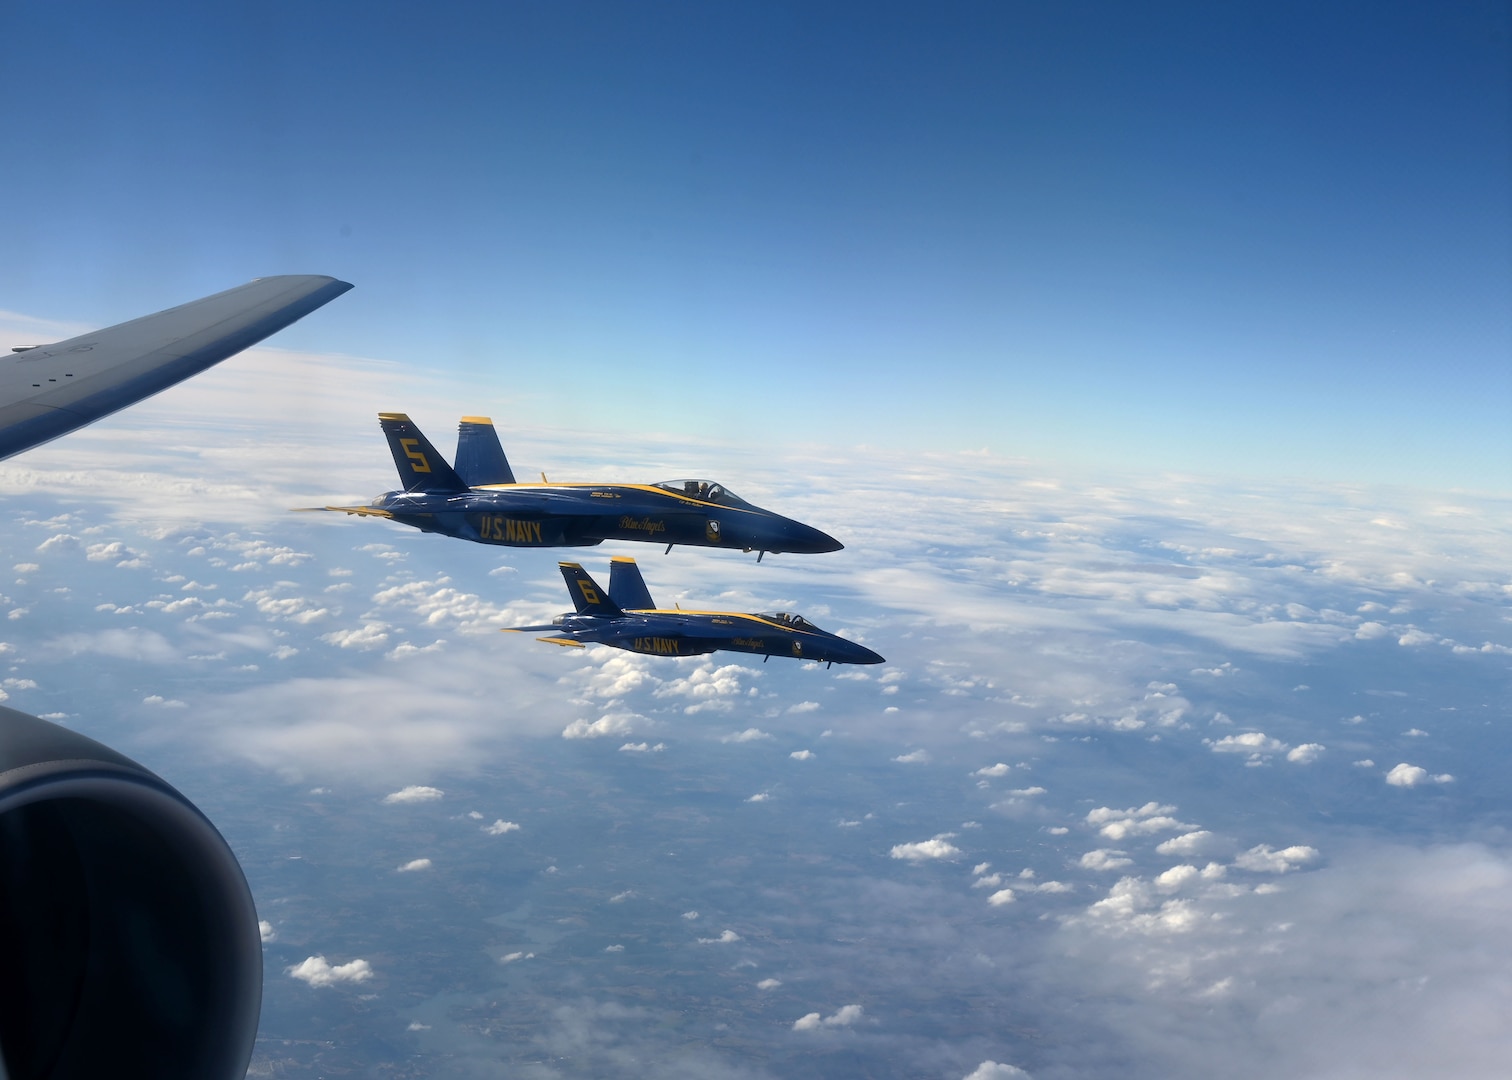 Two F/A-18 Super Hornets of the U.S. Navy's Blue Angles flight squadron fly alongside a Pease KC-46A Pegasus refueler Dec. 12 in Georgia airspace.